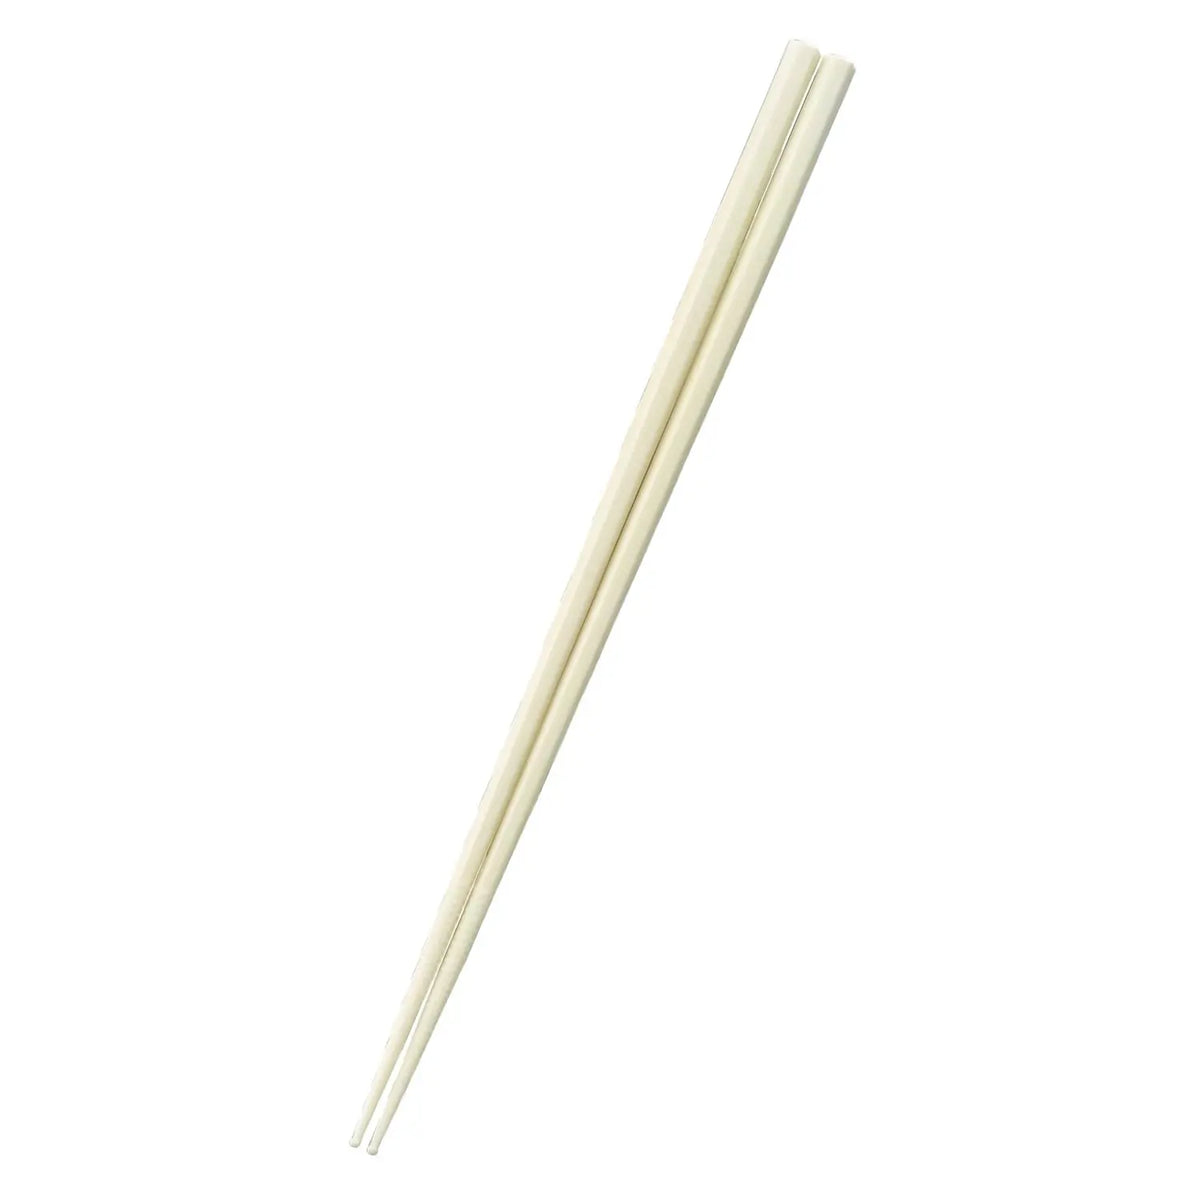 Akebono SPS Resin Double-Embossed Non-Slip Cooking Chopsticks 30cm